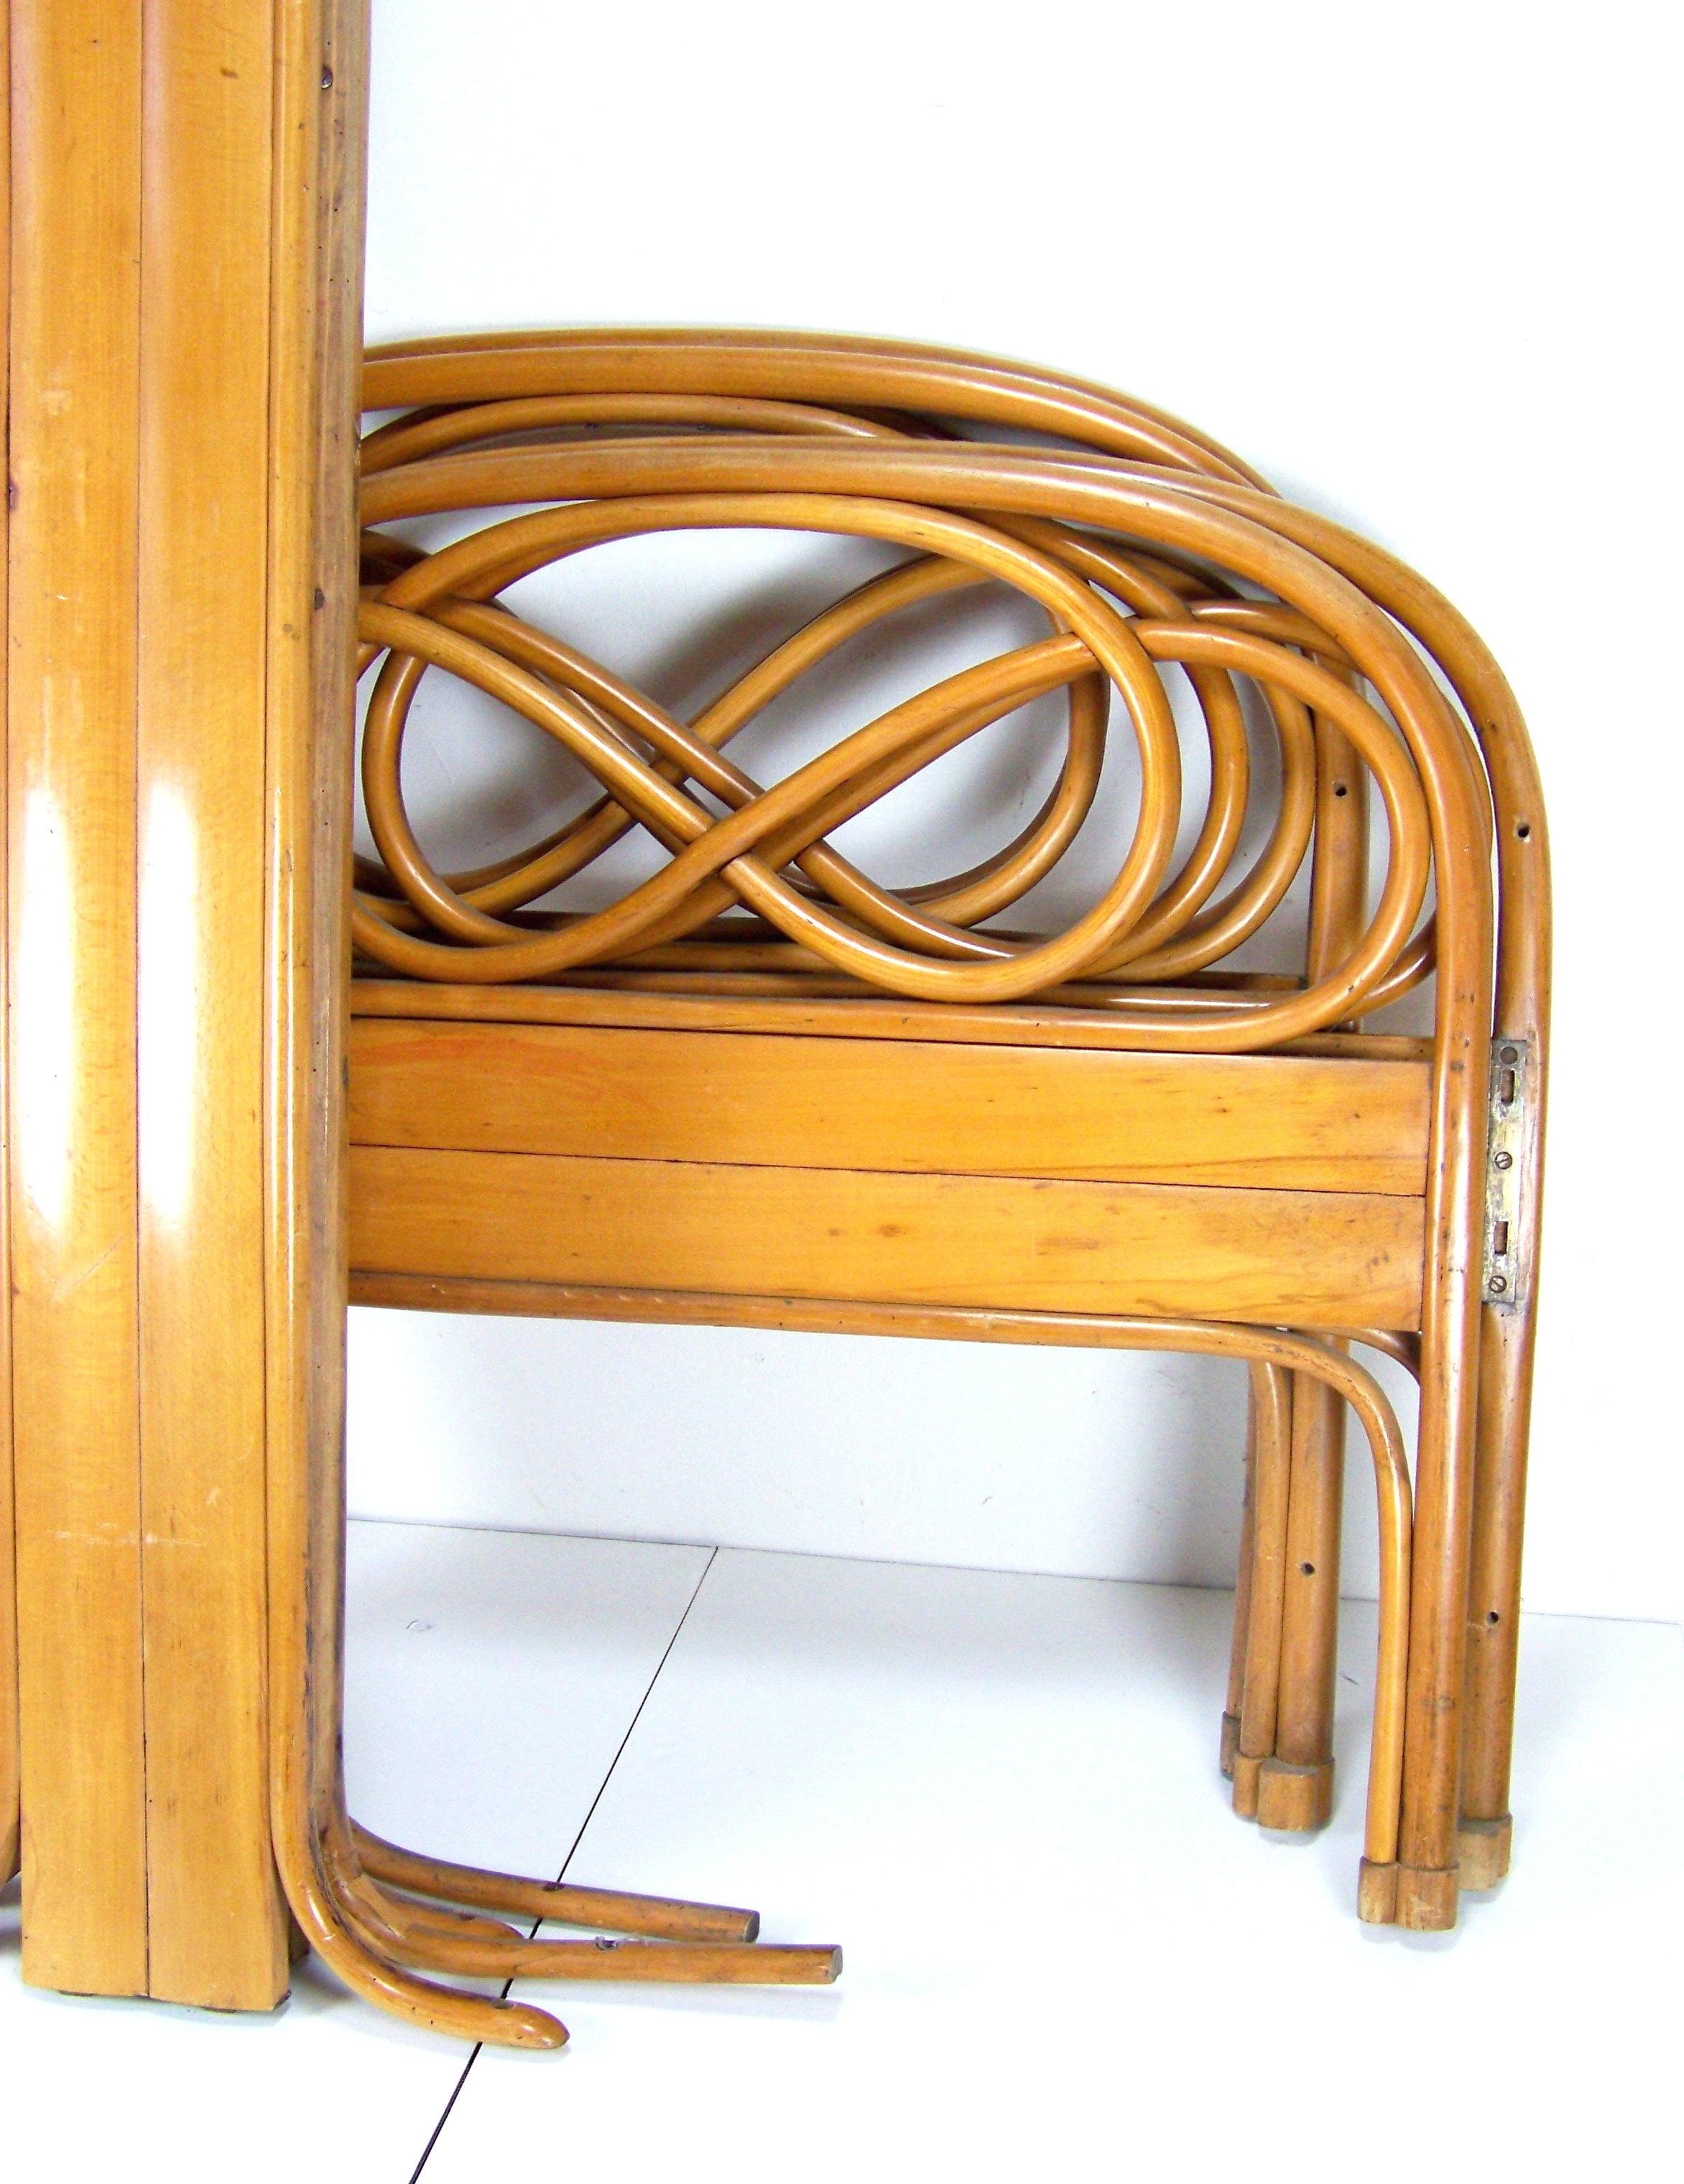 Manufactured in Austria by the Gebrüder Thonet company. Restored in the past, perfectly cleaned and re-polished with shellac polish.